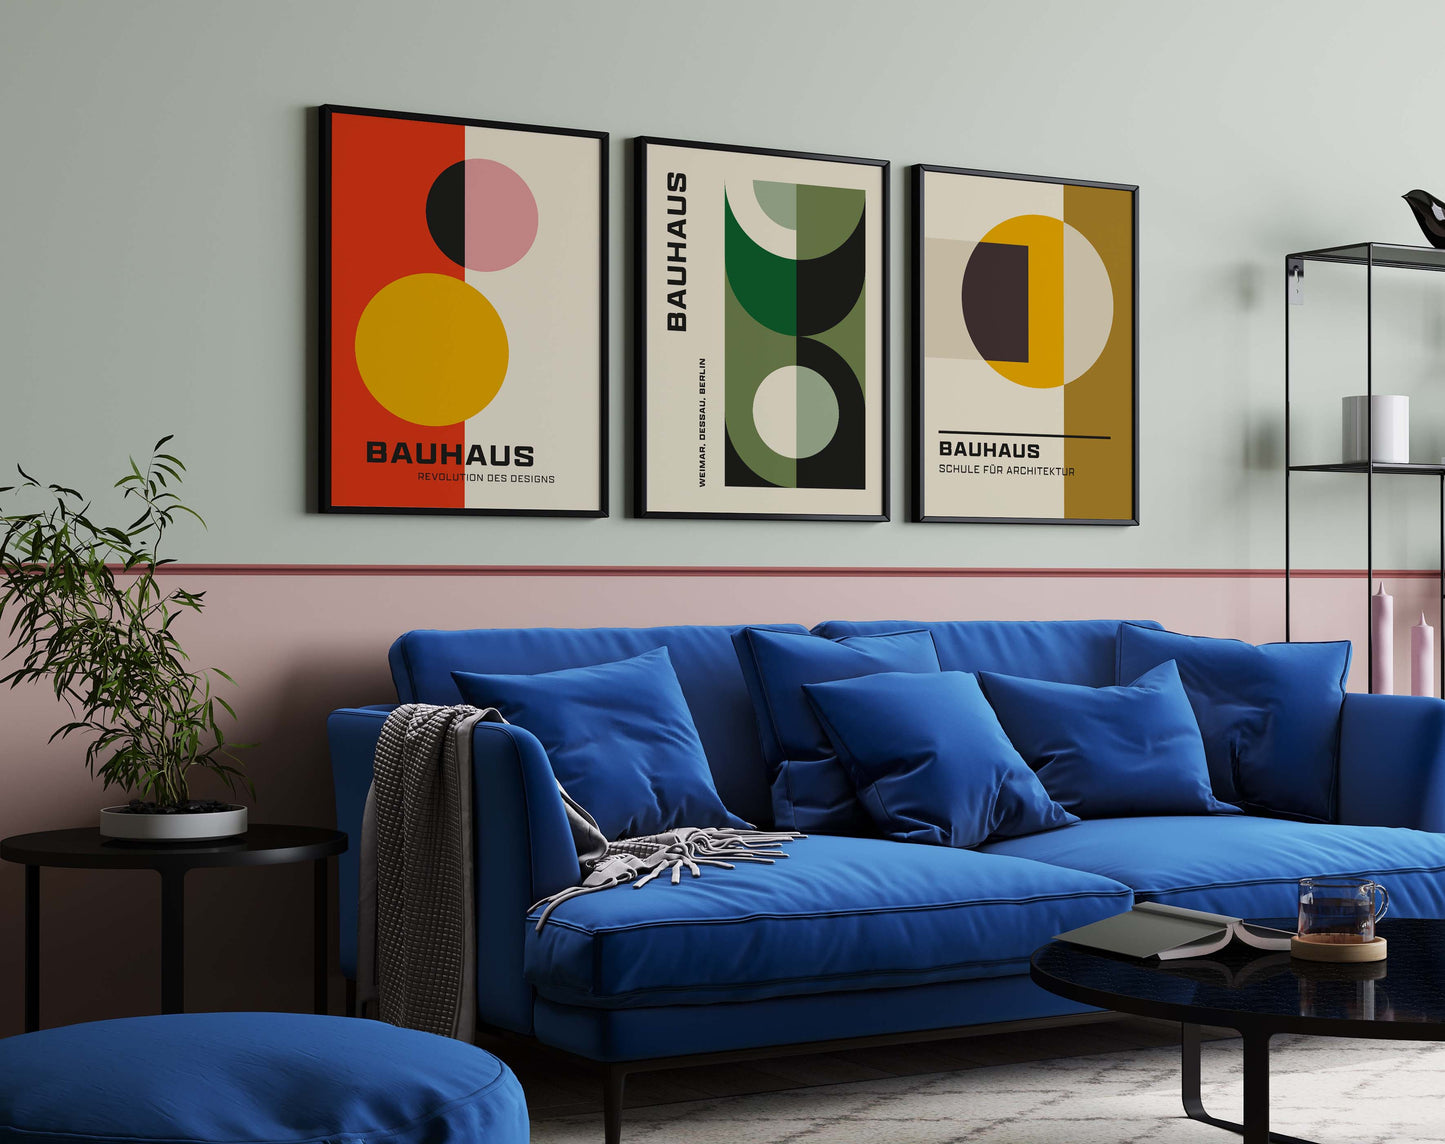 Set of 3 Bauhaus prints in a mid century modern style, in red, green and yellow